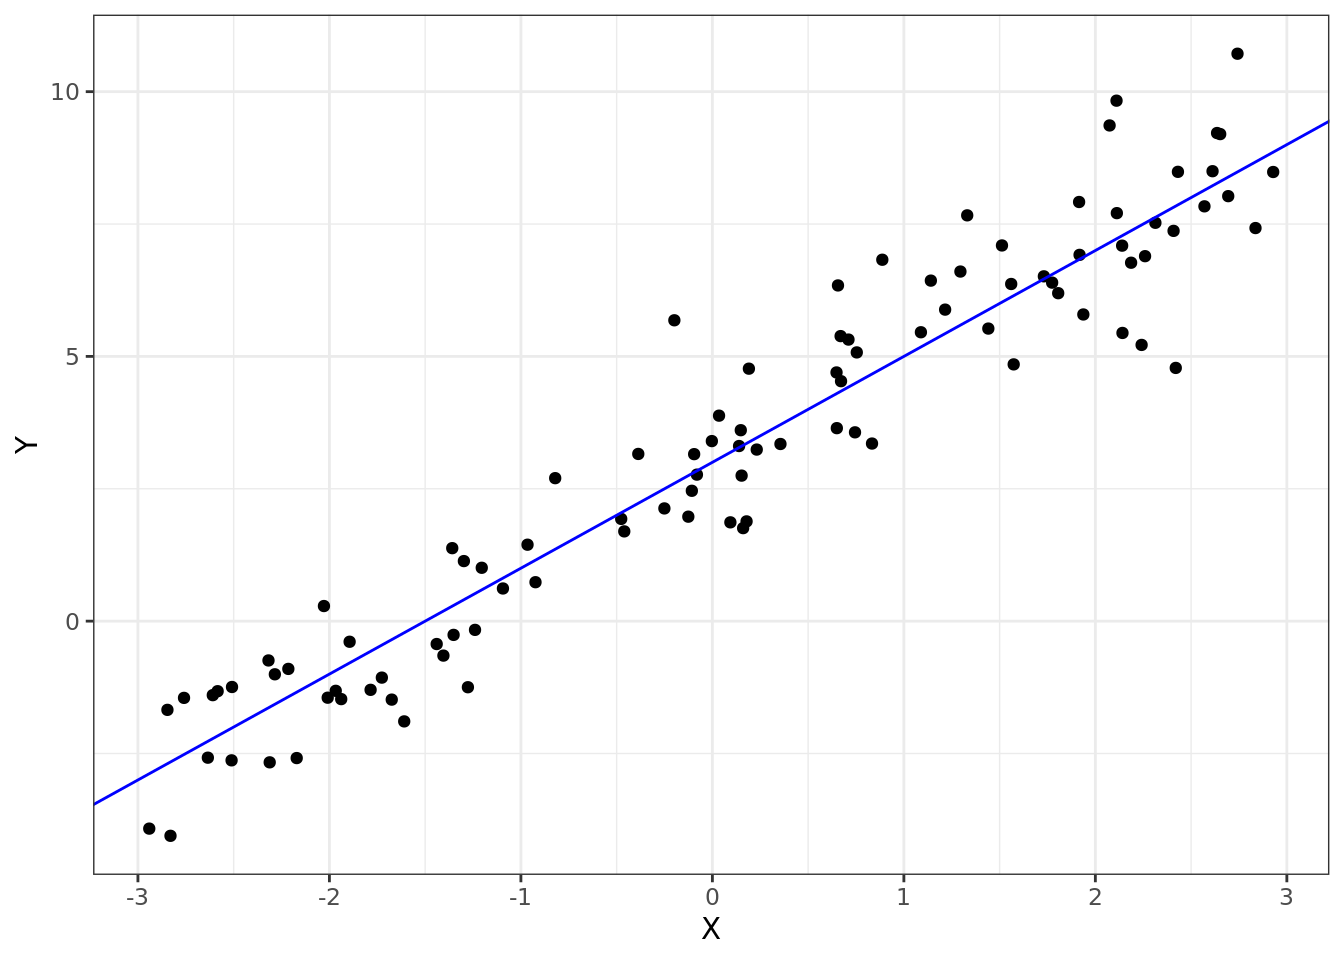 Simulated data illustrating the linear model Y = 3 + 2X